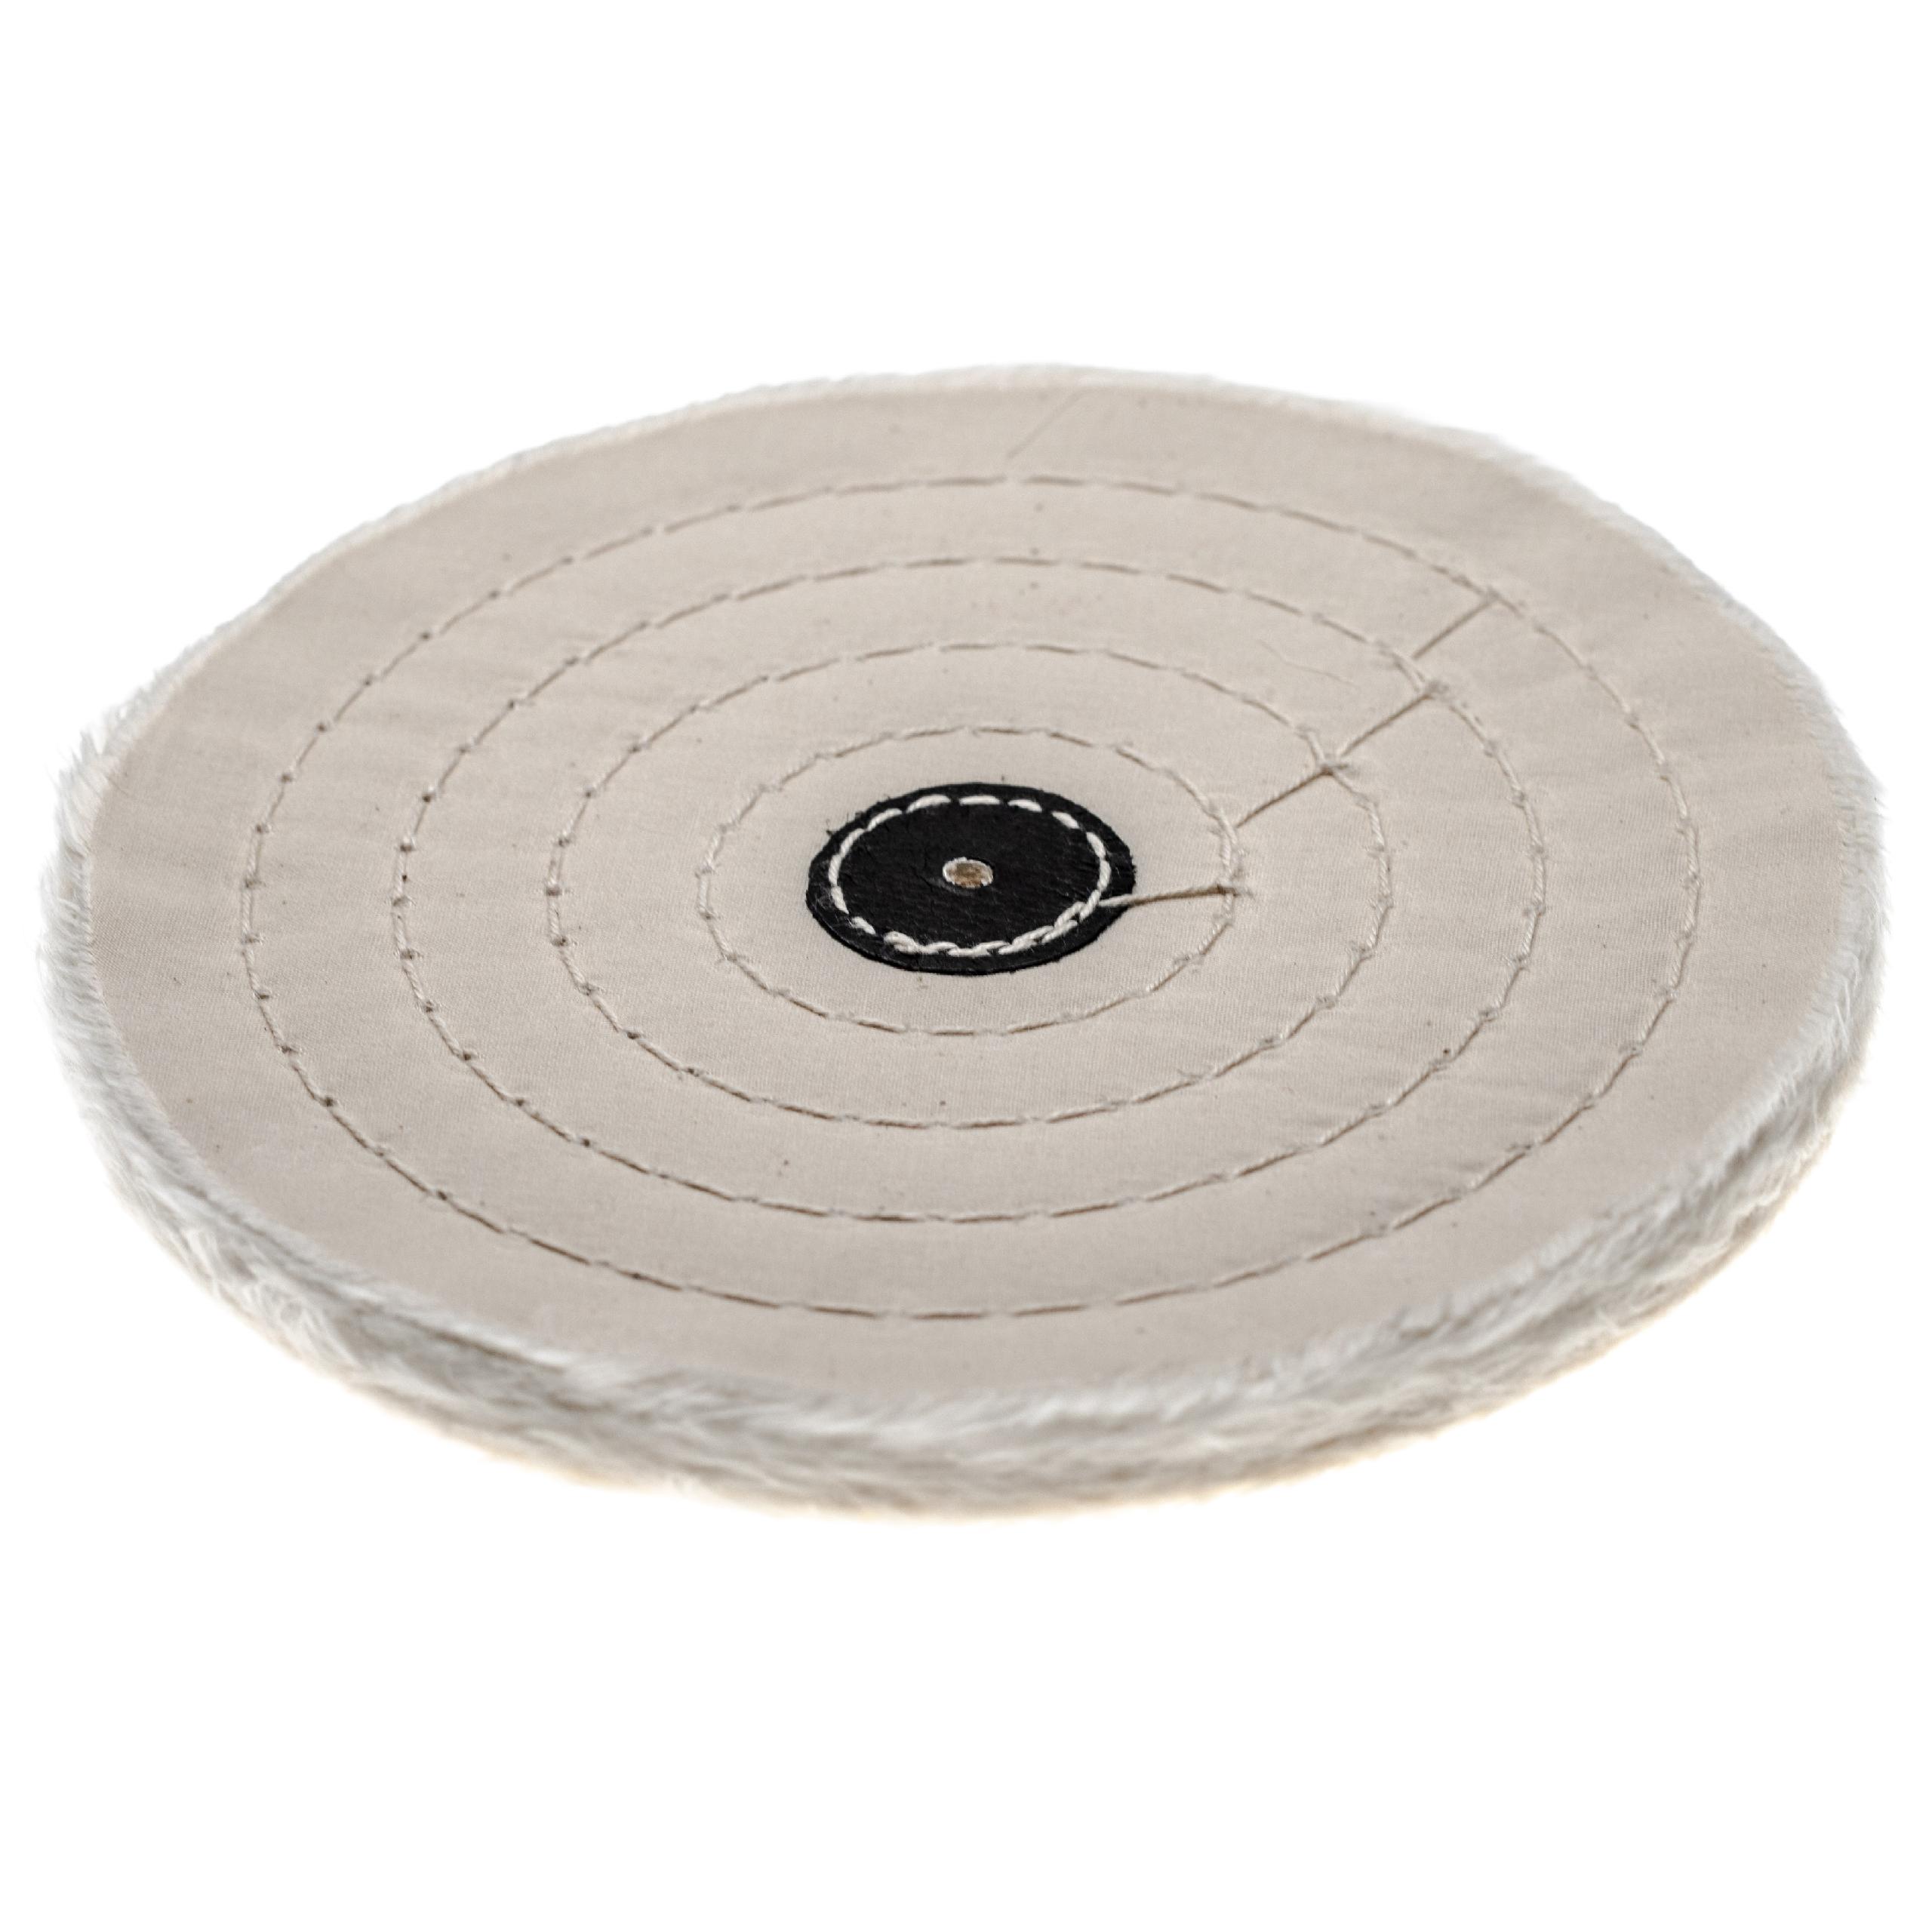 Polishing Pad suitable for all Standard Angle Grinders, Screwdrivers with 17.7cm Diameter - cream